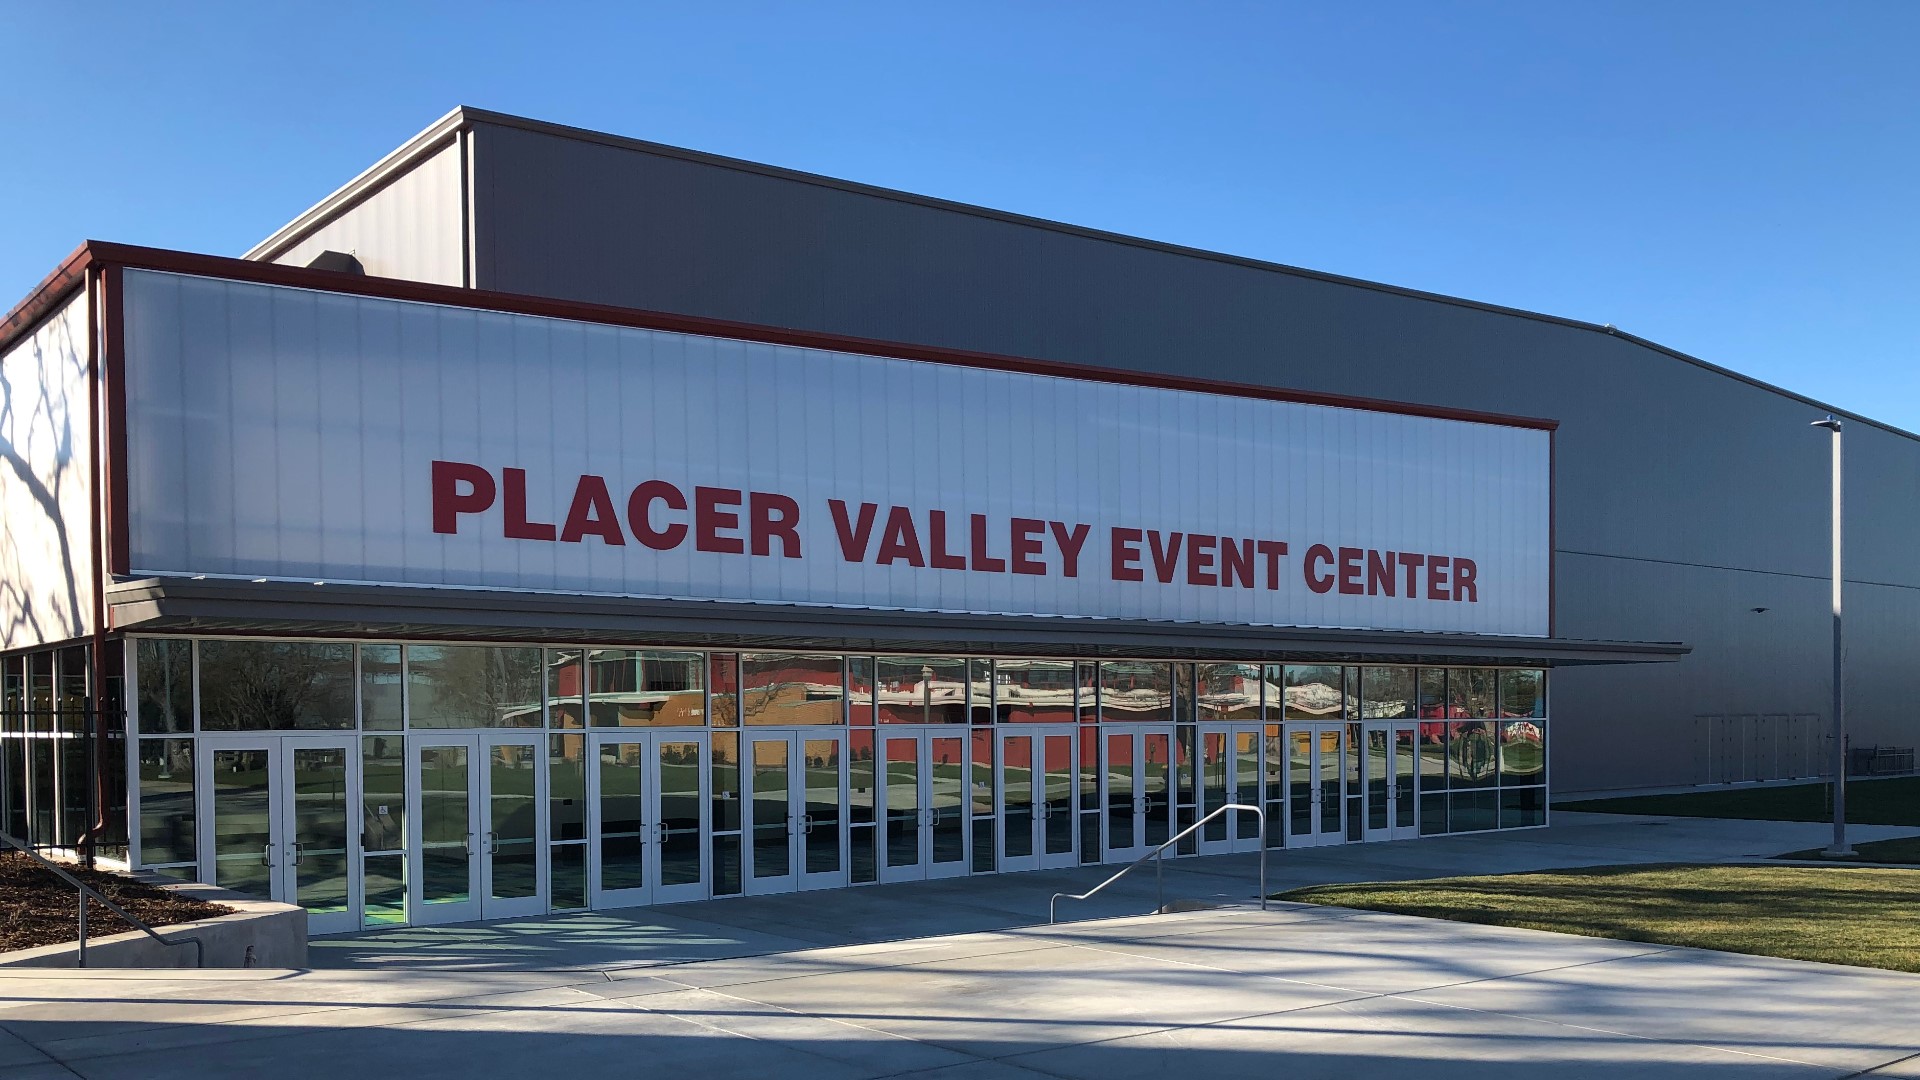 After more than a year of construction and $34 million later, the Placer Valley Events Center's grand opening is scheduled for Feb. 13.